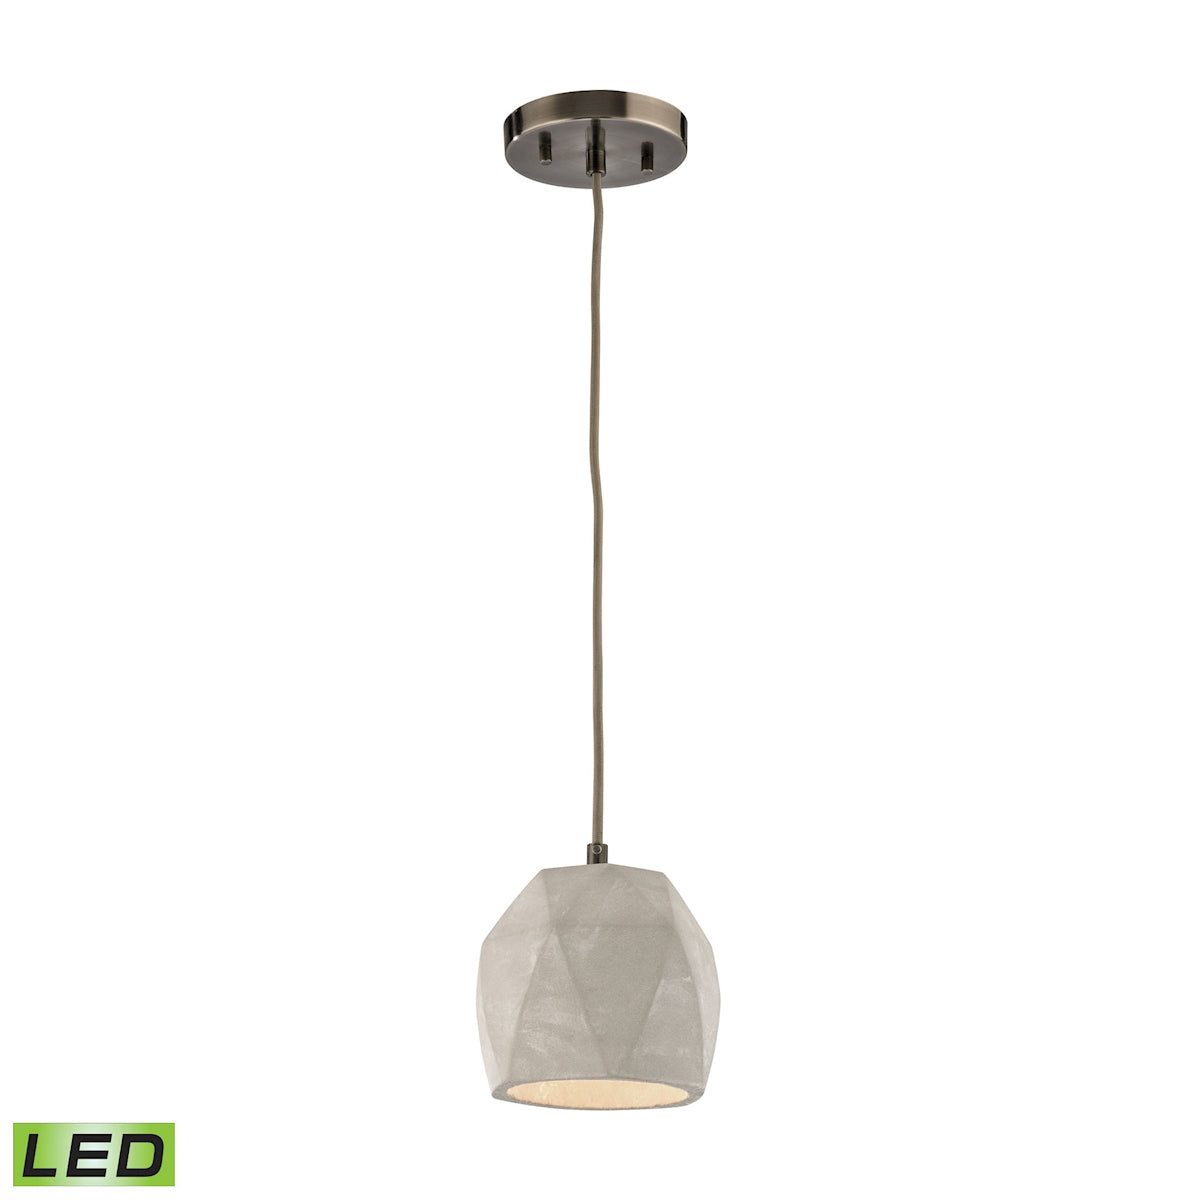 ELK Lighting 45330/1-LED Urban Form 1-Light Mini Pendant in Black Nickel with Natural Concrete Shade - Includes LED Bulb